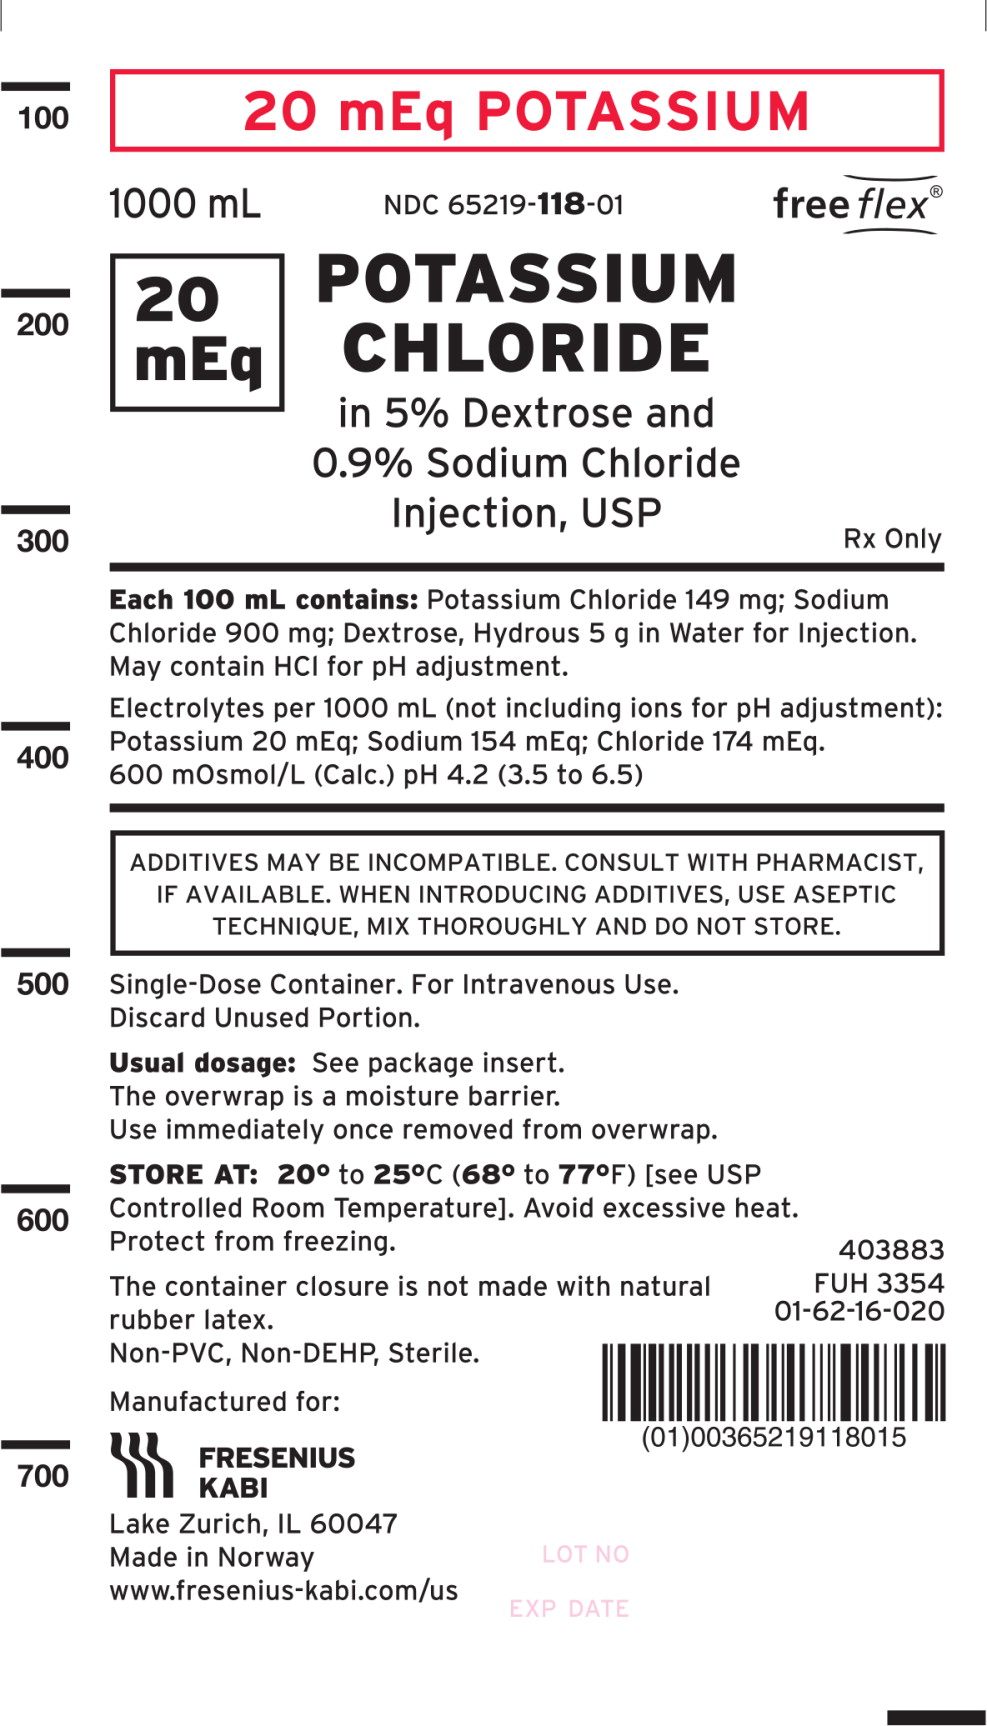 PACKAGE LABEL - PRINCIPAL DISPLAY – Potassium Chloride in 5% Dextrose and 0.9% Sodium Chloride Injection, USP
